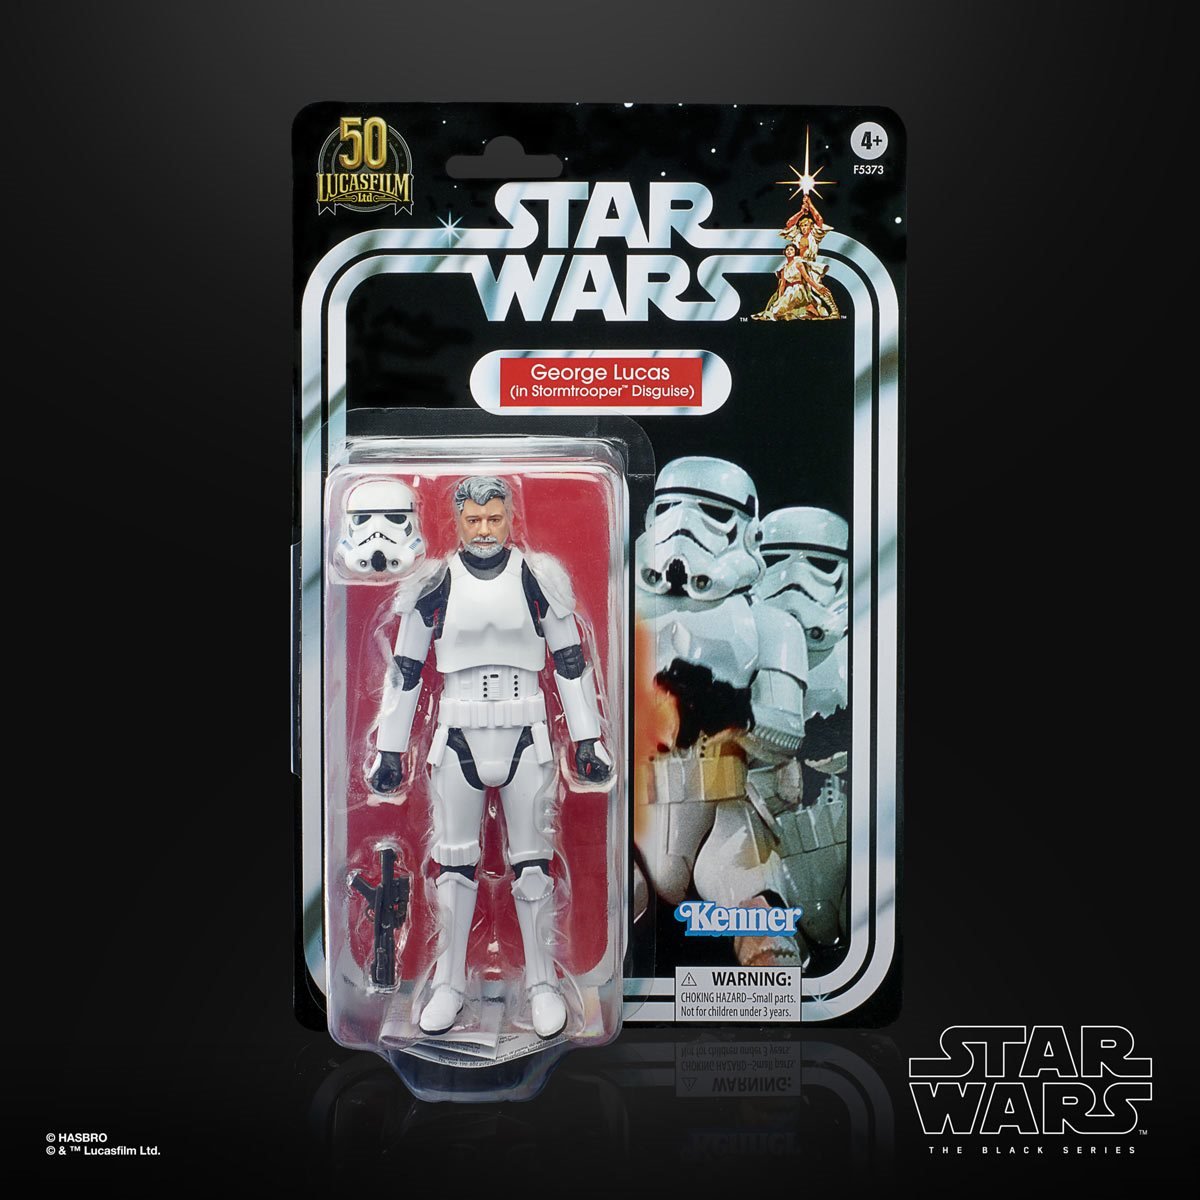 Star Wars: The Black Series George Lucas (in Stormtrooper Disguise) Hasbro No Protector Case